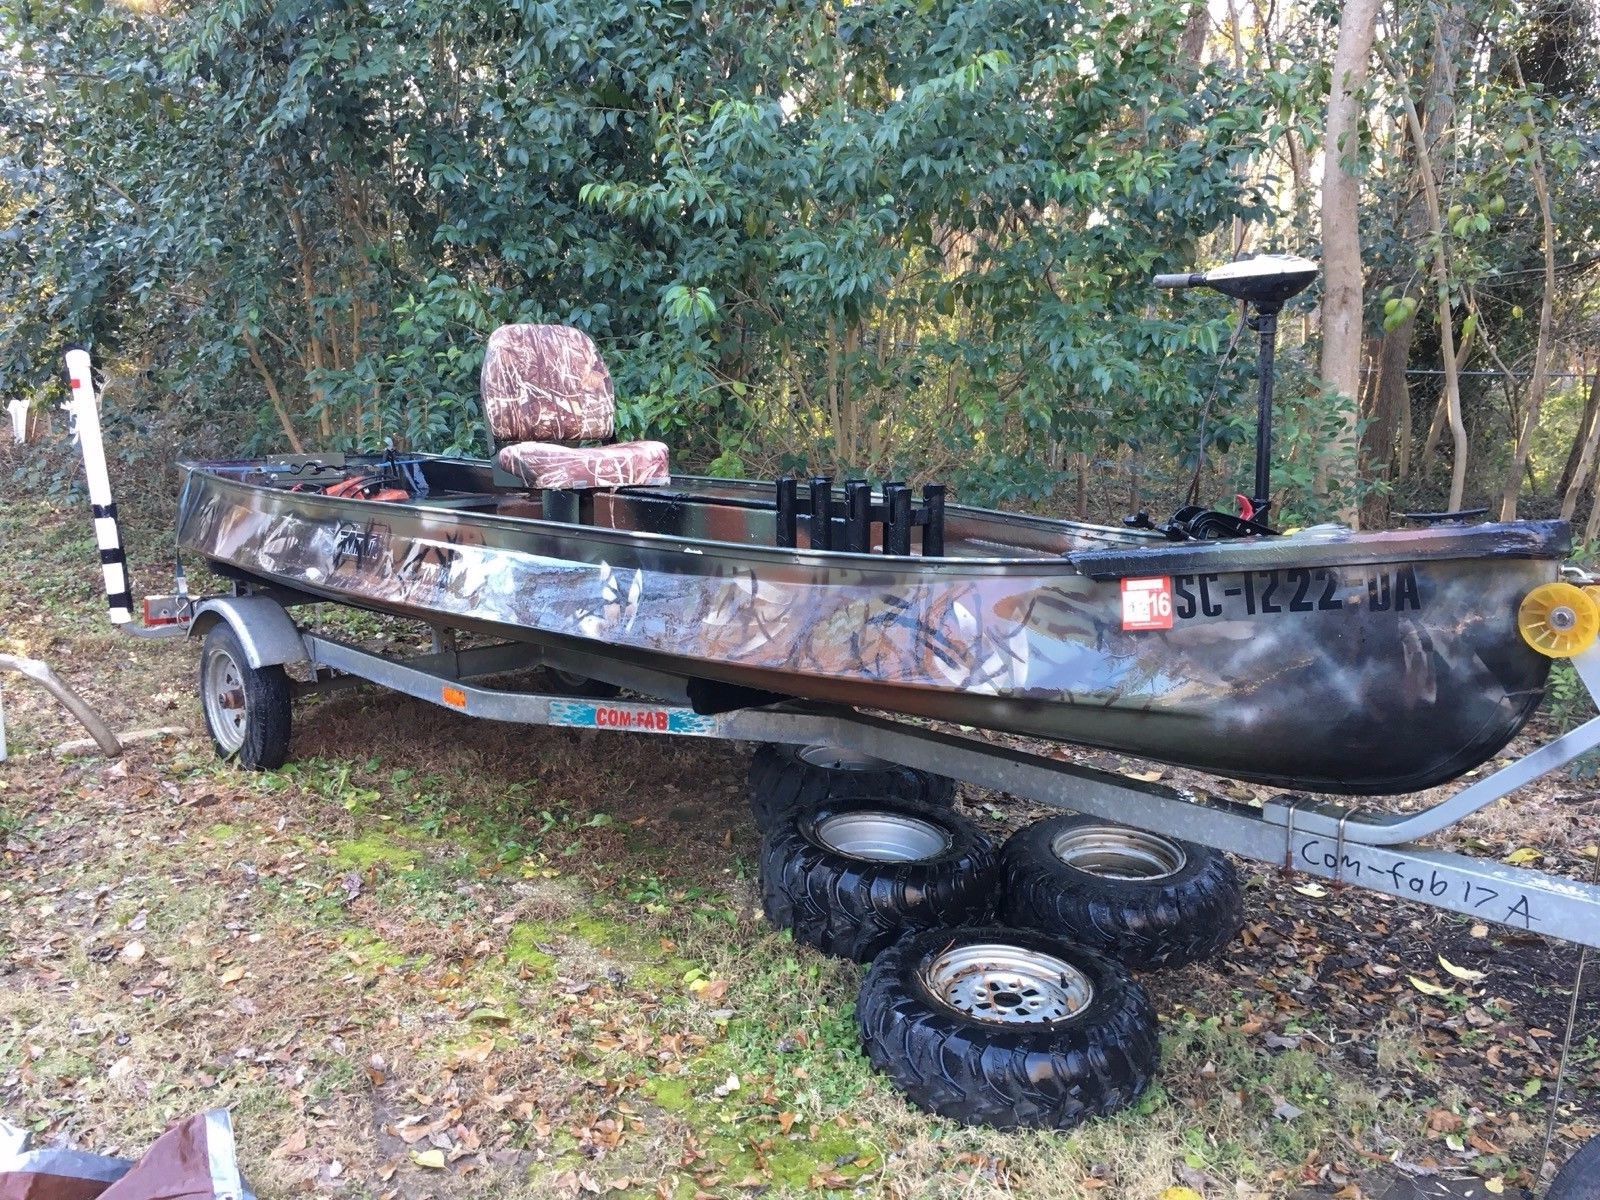 River Hawk B-60 Duck Boat 2006 for sale for $6,000 - Boats-from-USA.com